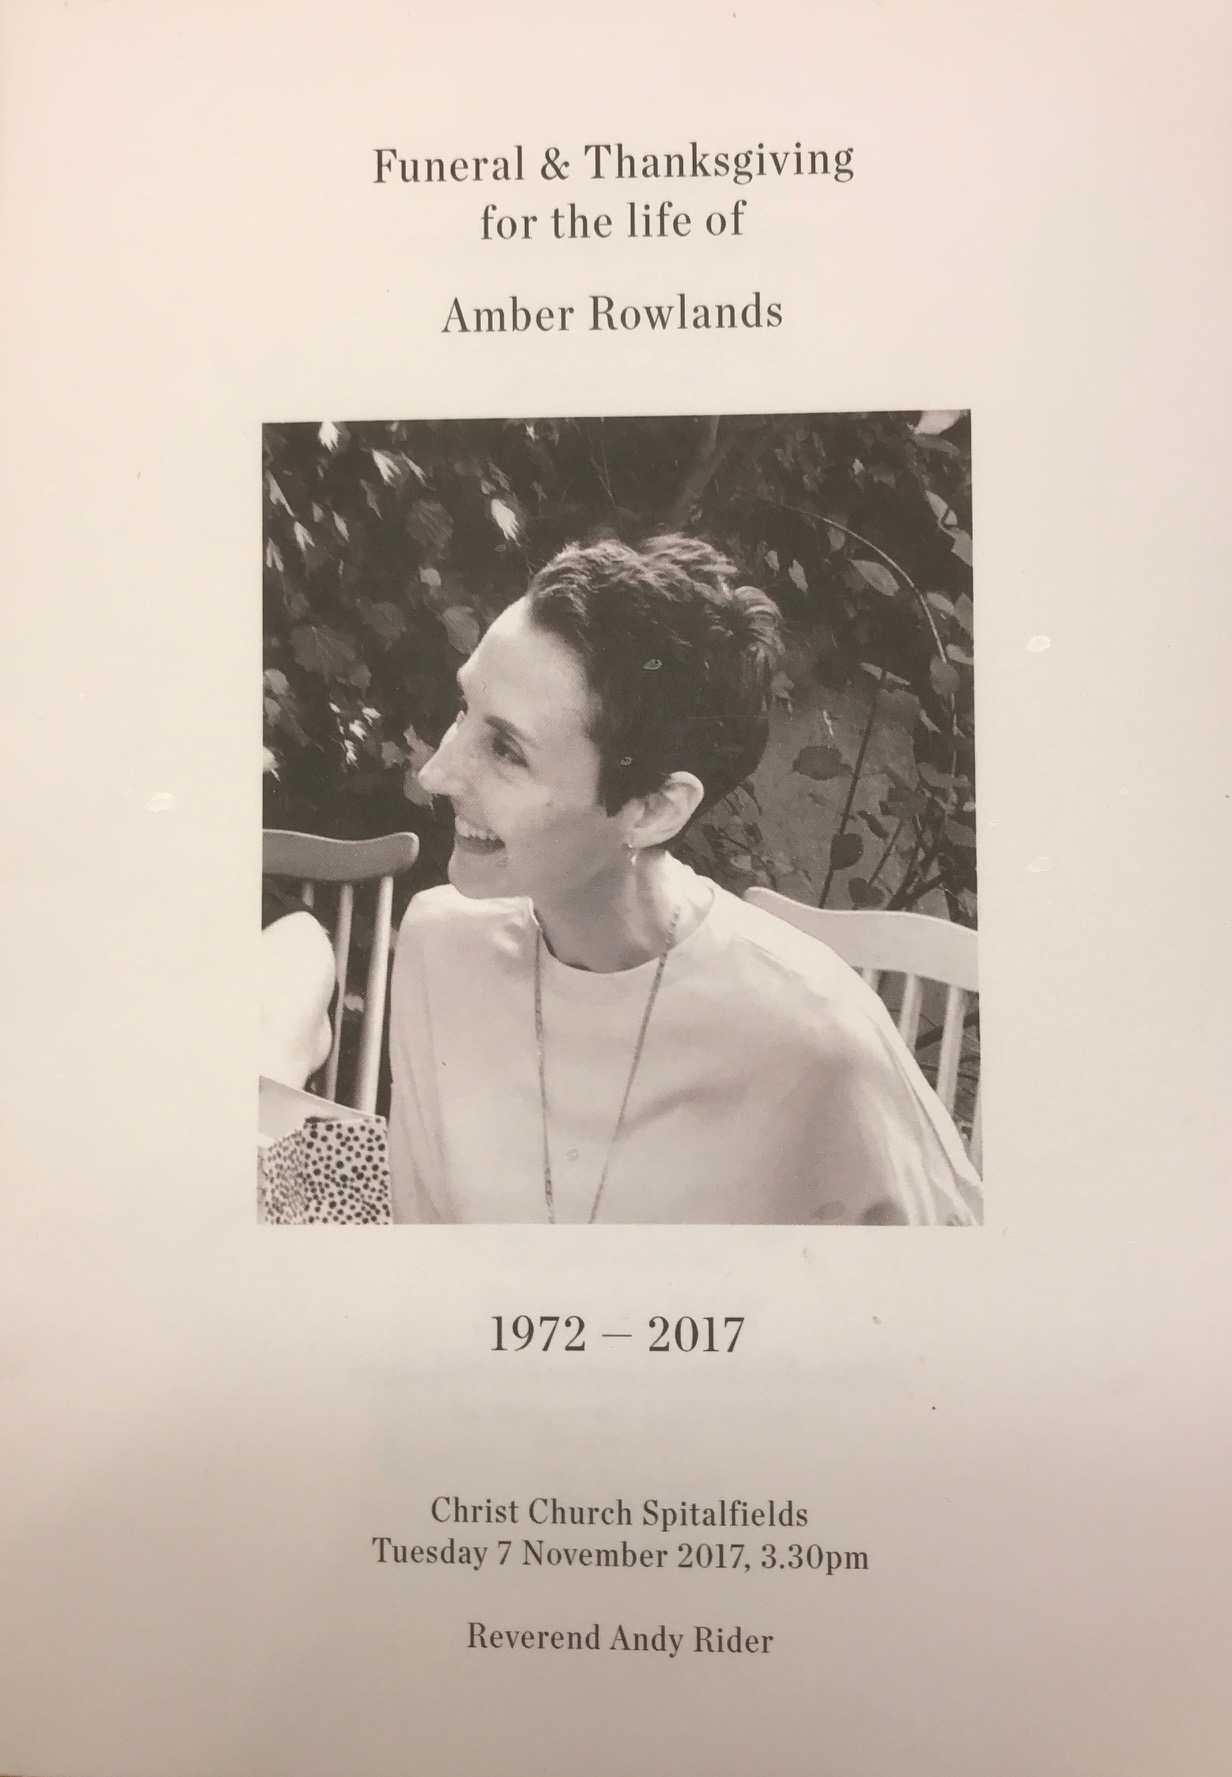 Great Success: Order of service: Funeral and Thanksgiving for the life of Amber Rowlands 1972-2017. Christ Church Spitalfields Tuesday 7 November 2017, 3.30pm Reverend Andy Rider.